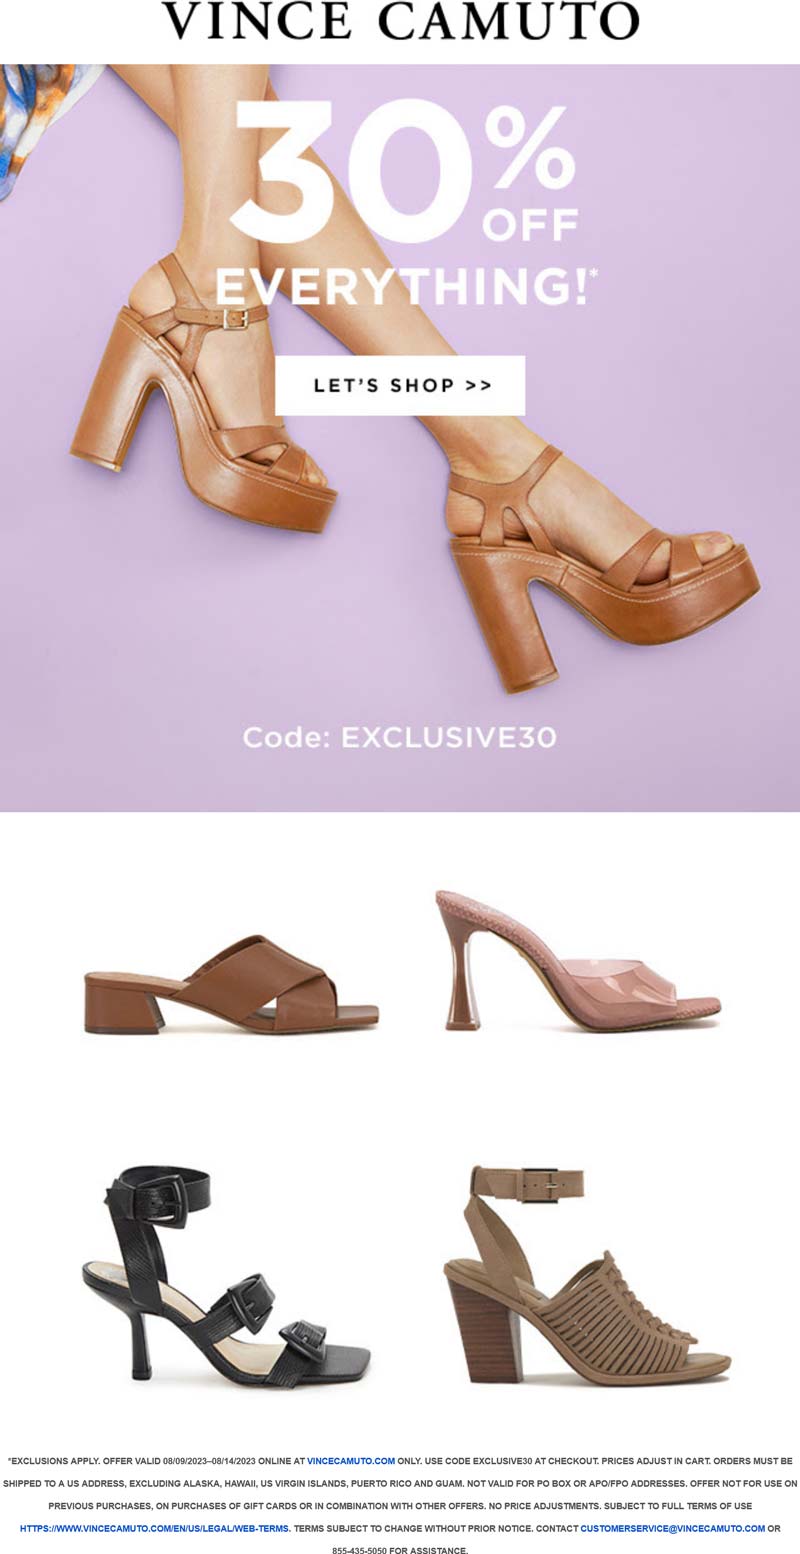 Vince Camuto stores Coupon  30% off everything at Vince Camuto via promo code EXCLUSIVE30 #vincecamuto 